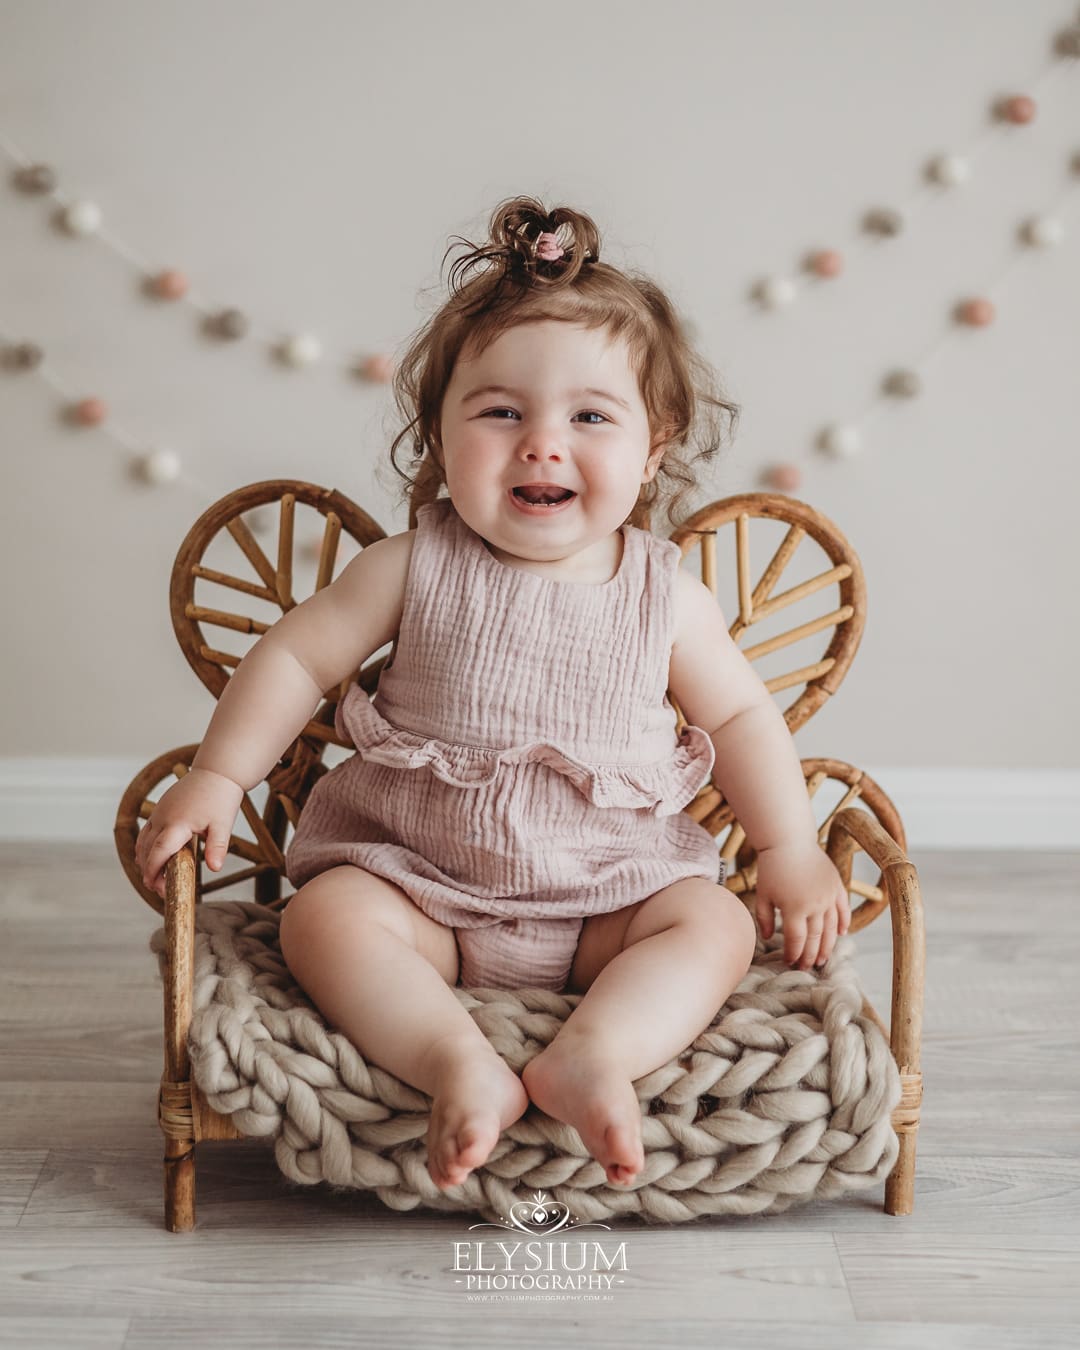 A baby girl sits on a bamboo chair prop wearing a pink romper in a bright studio